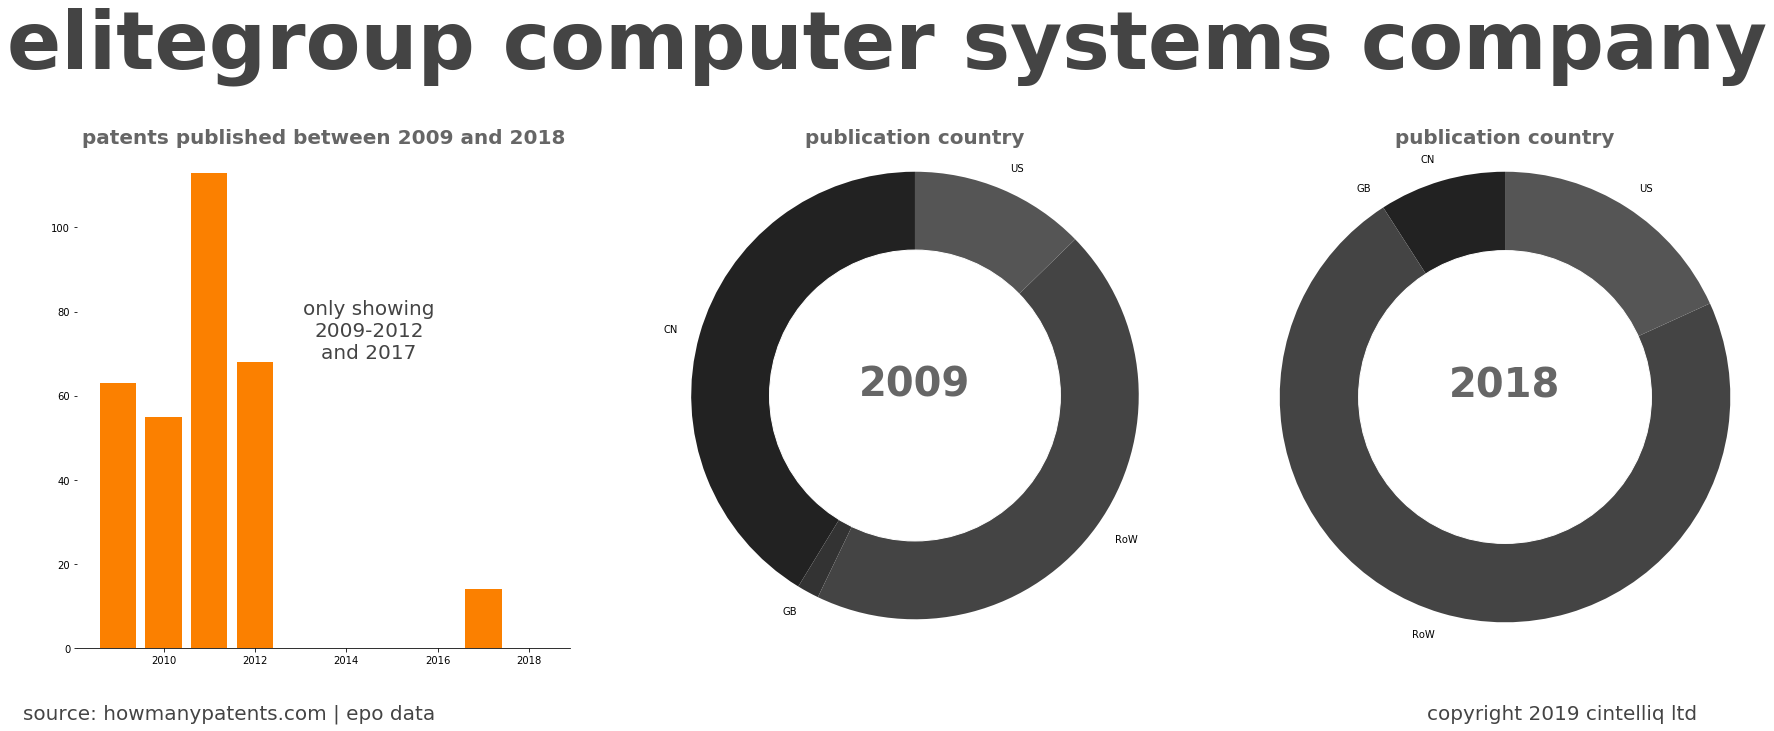 summary of patents for Elitegroup Computer Systems Company